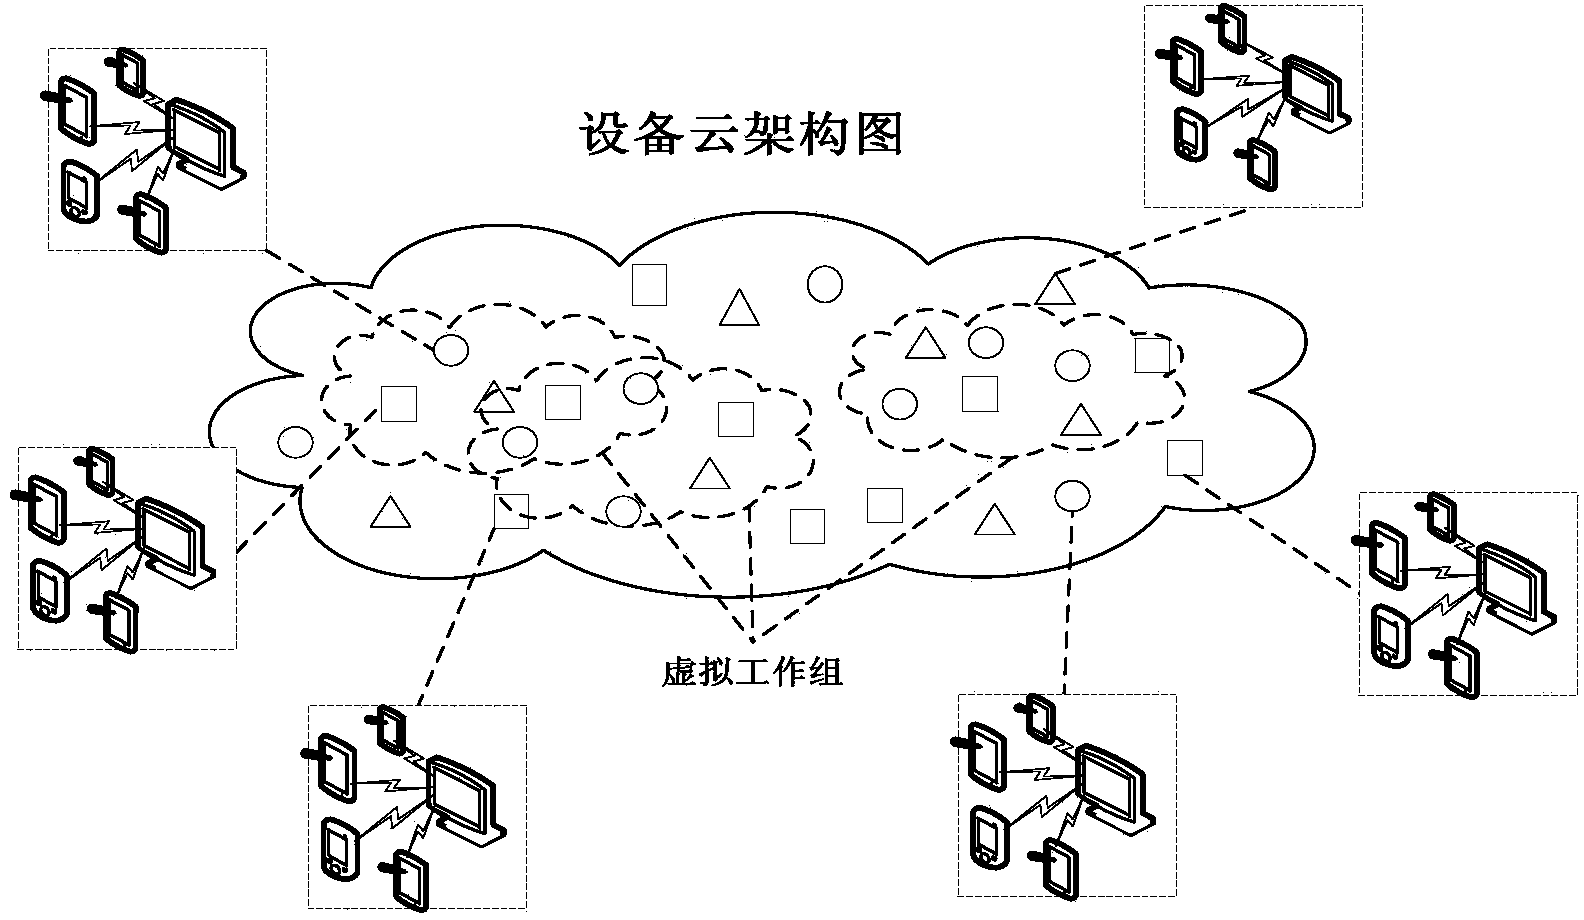 Equipment cooperation multi-screen interactive system under equipment cloud environment and method thereof